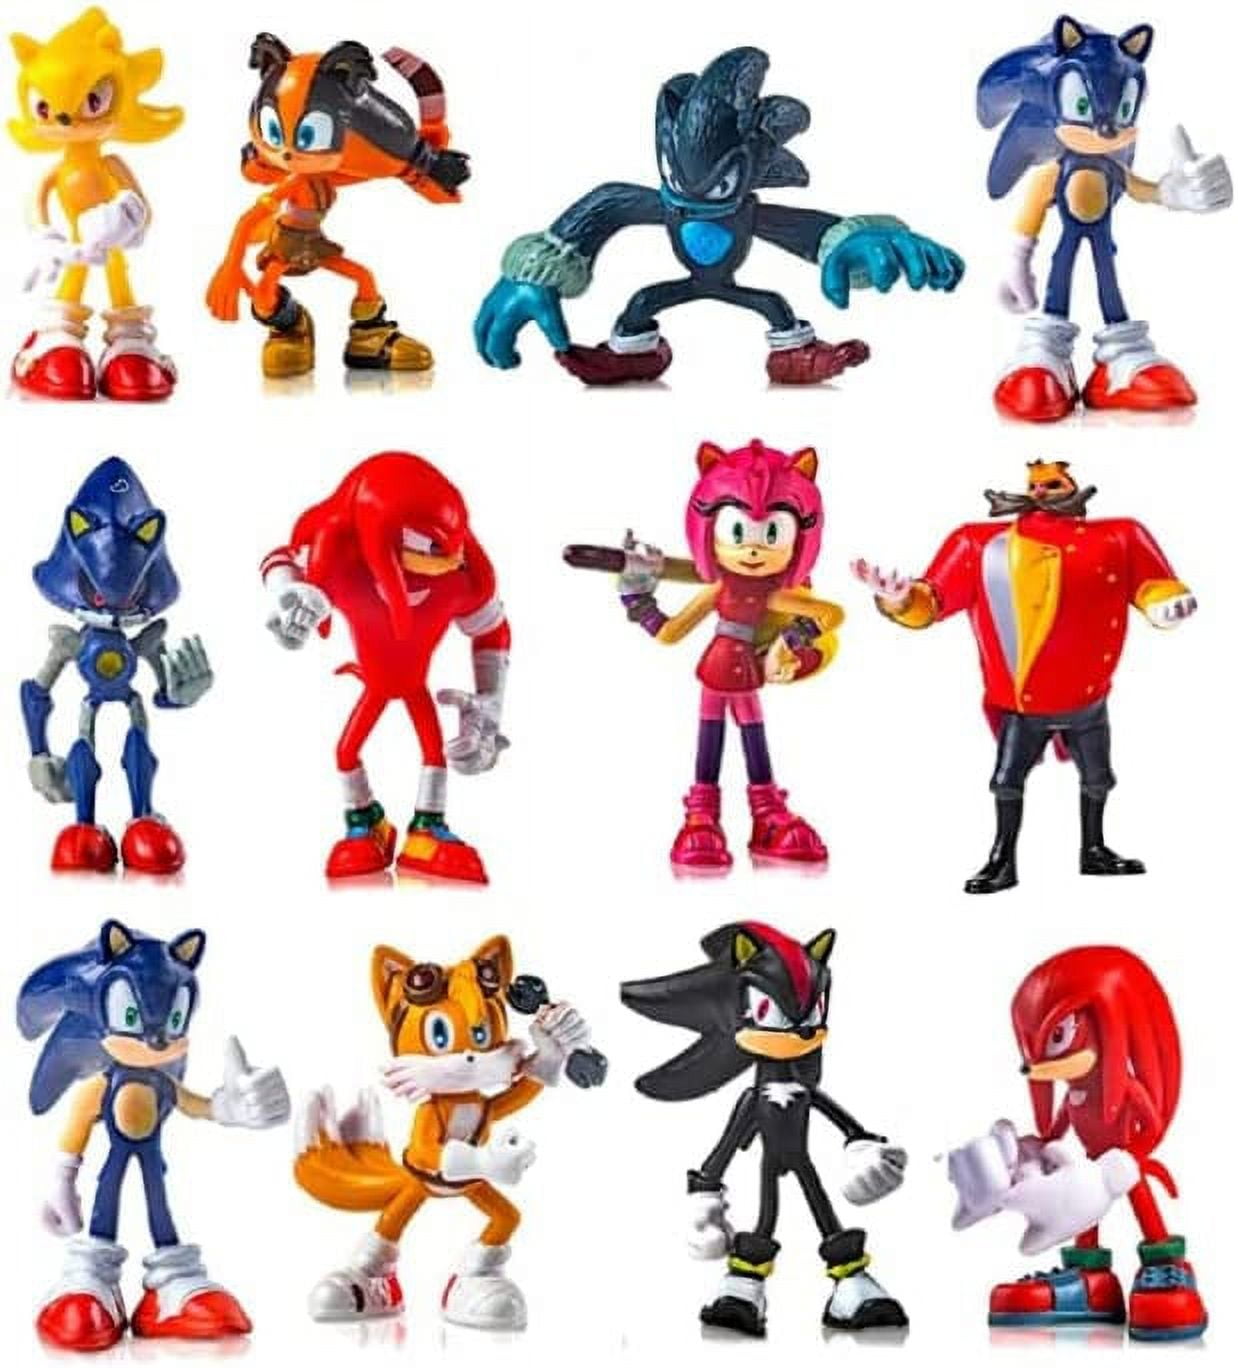 J&G Sonic the Hedgehog Toys Action Figures 2.5 inch, Pack of 12